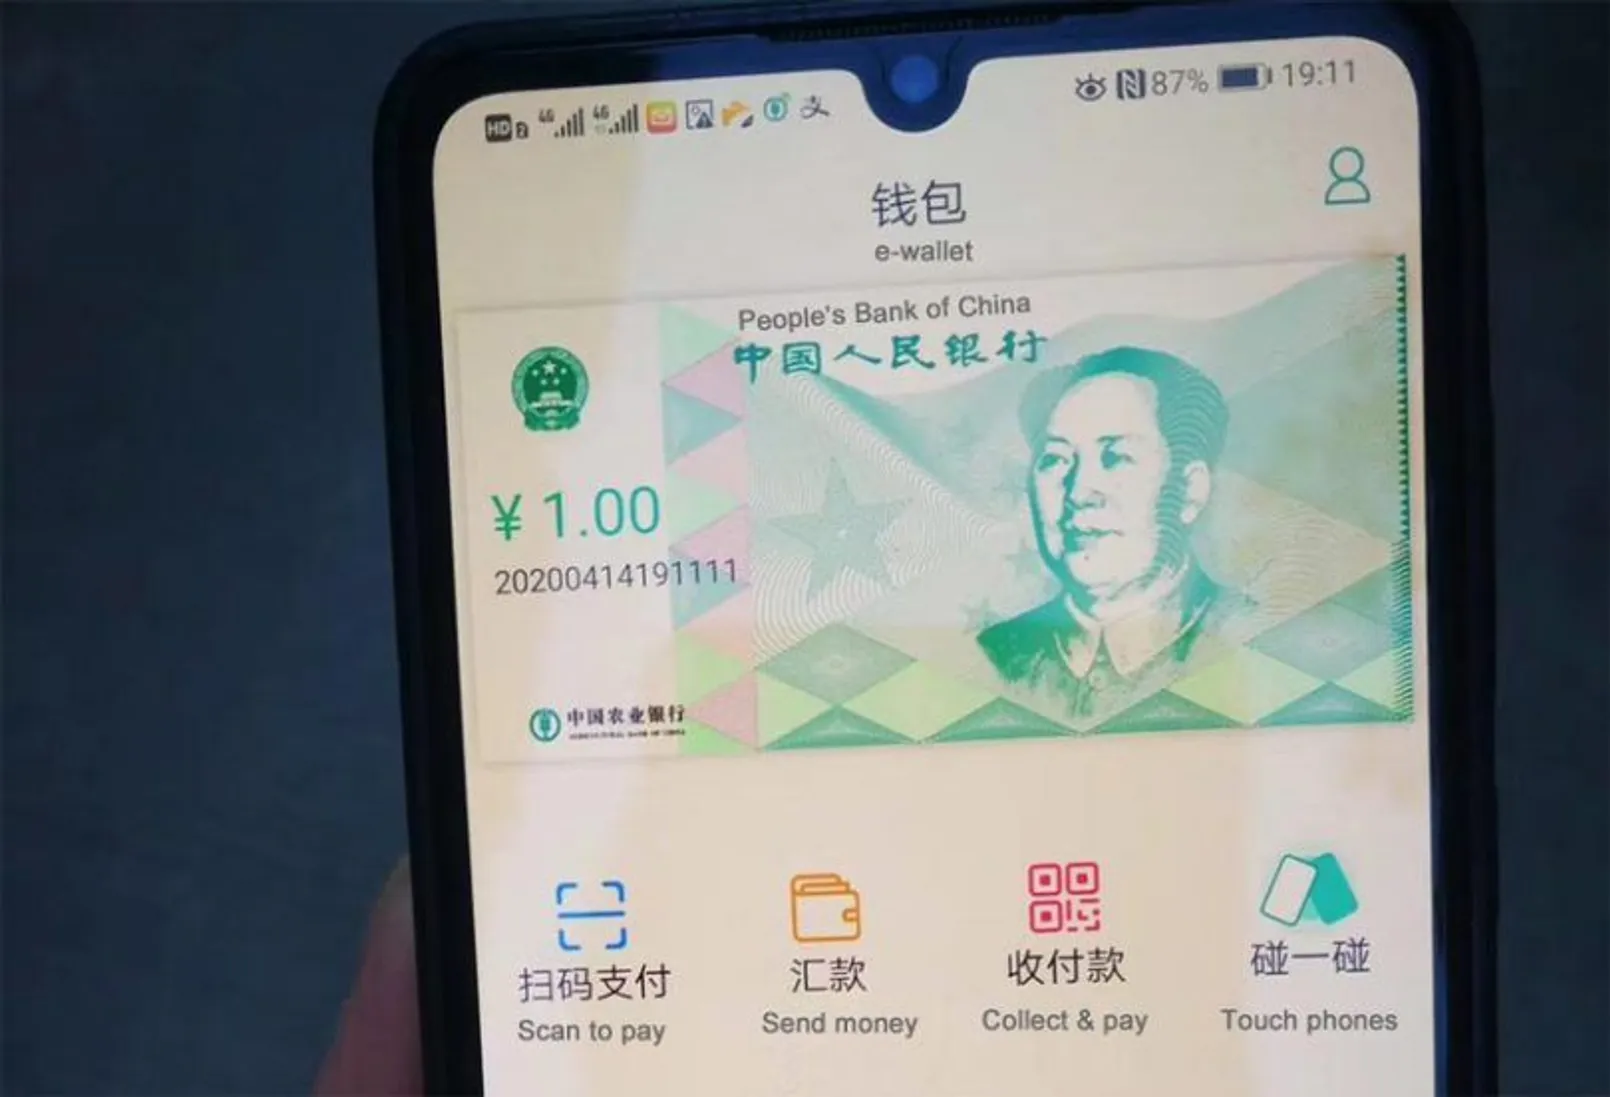 China Central Bank Digital Currency Wallet 810x552 1.jpg